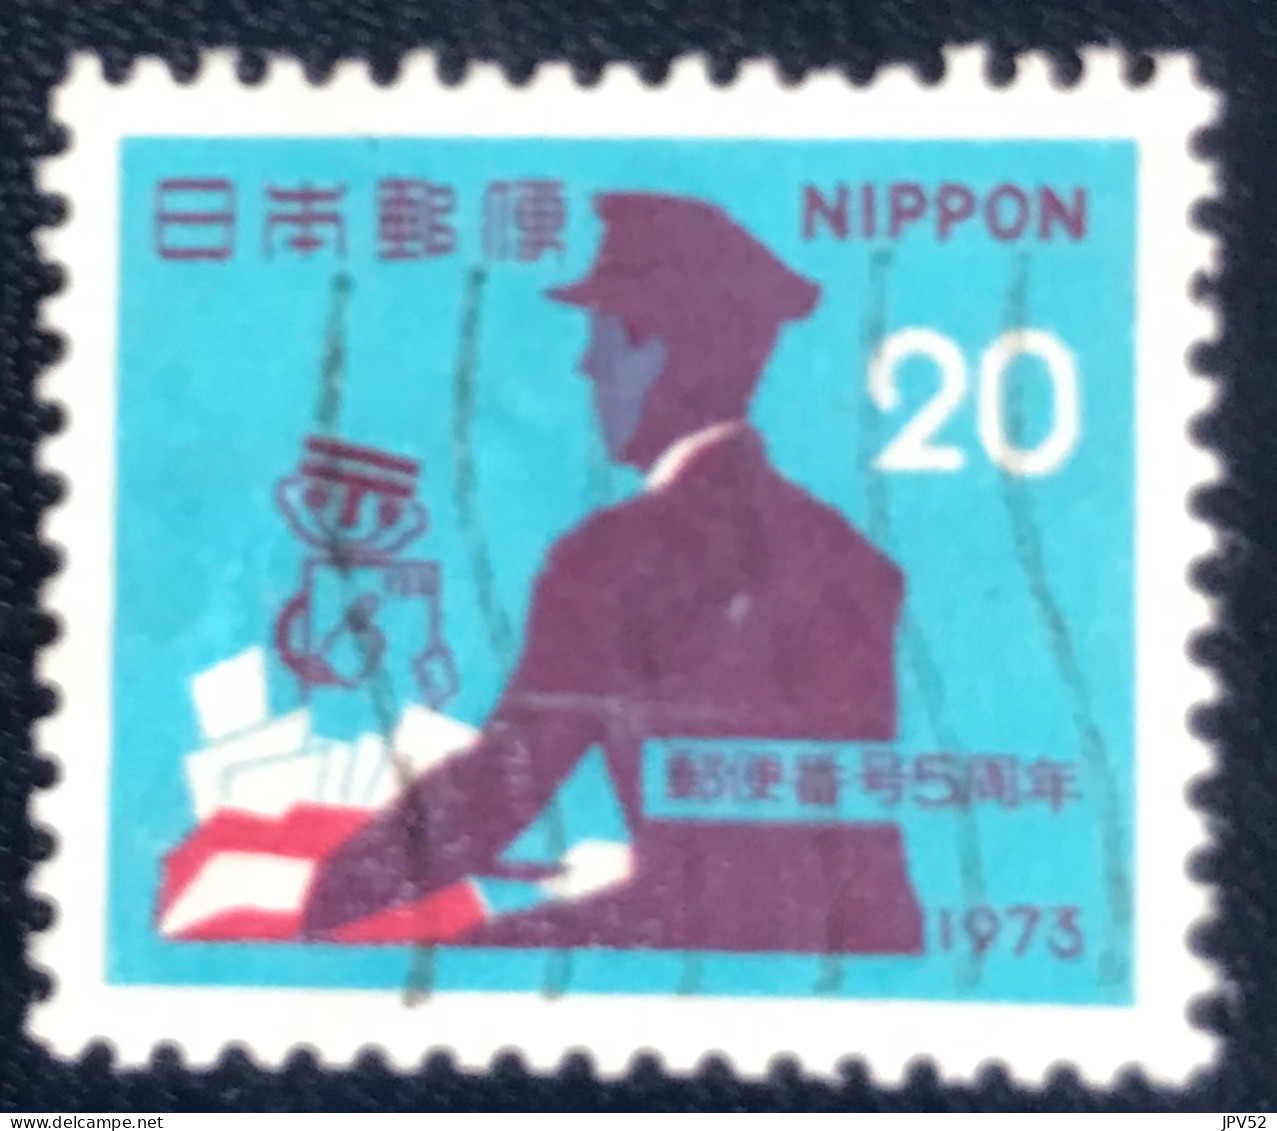 Nippon - Japan - C14/41 - 1973 - (°)used - Michel 1184 - Postcode Campagne - Used Stamps